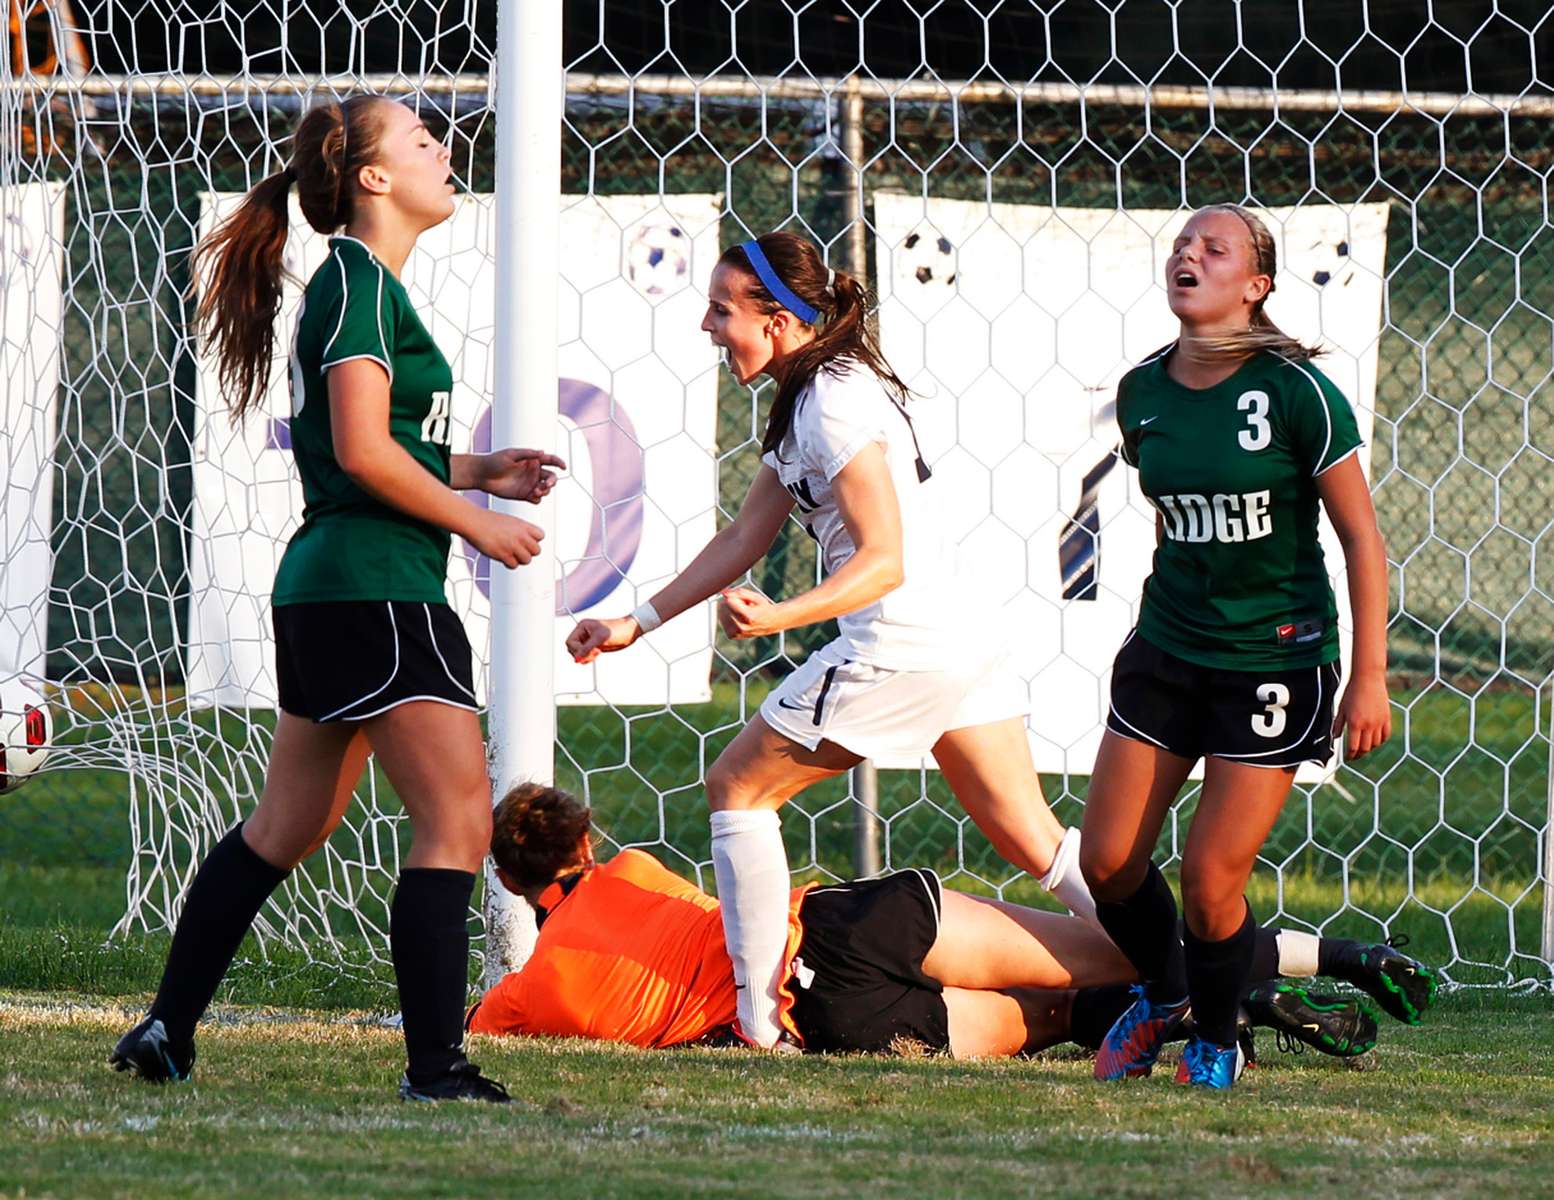 Carly Rototari of Pingry celebrates the overtime goal that sent her team to a 1-0 victory over Ridge High School in Bridgewater.